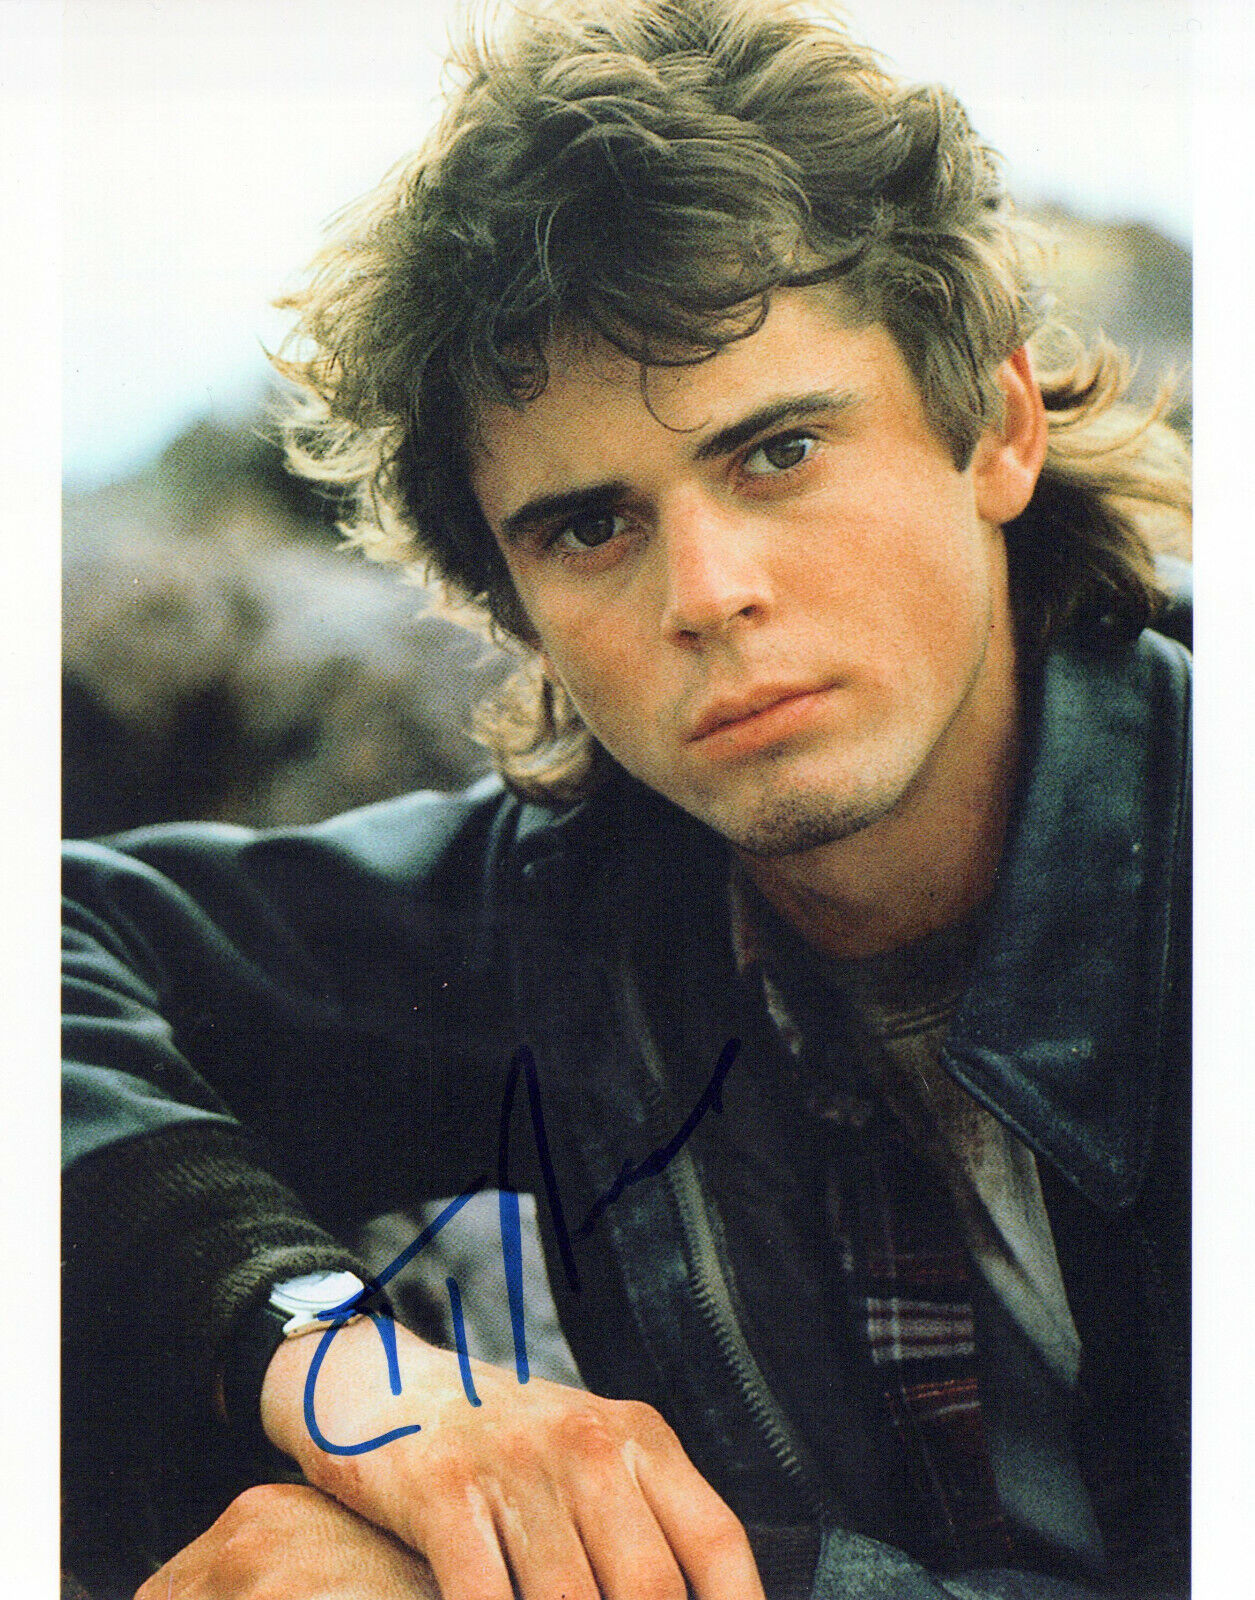 C. Thomas Howell head shot autographed Photo Poster painting signed 8x10 #3